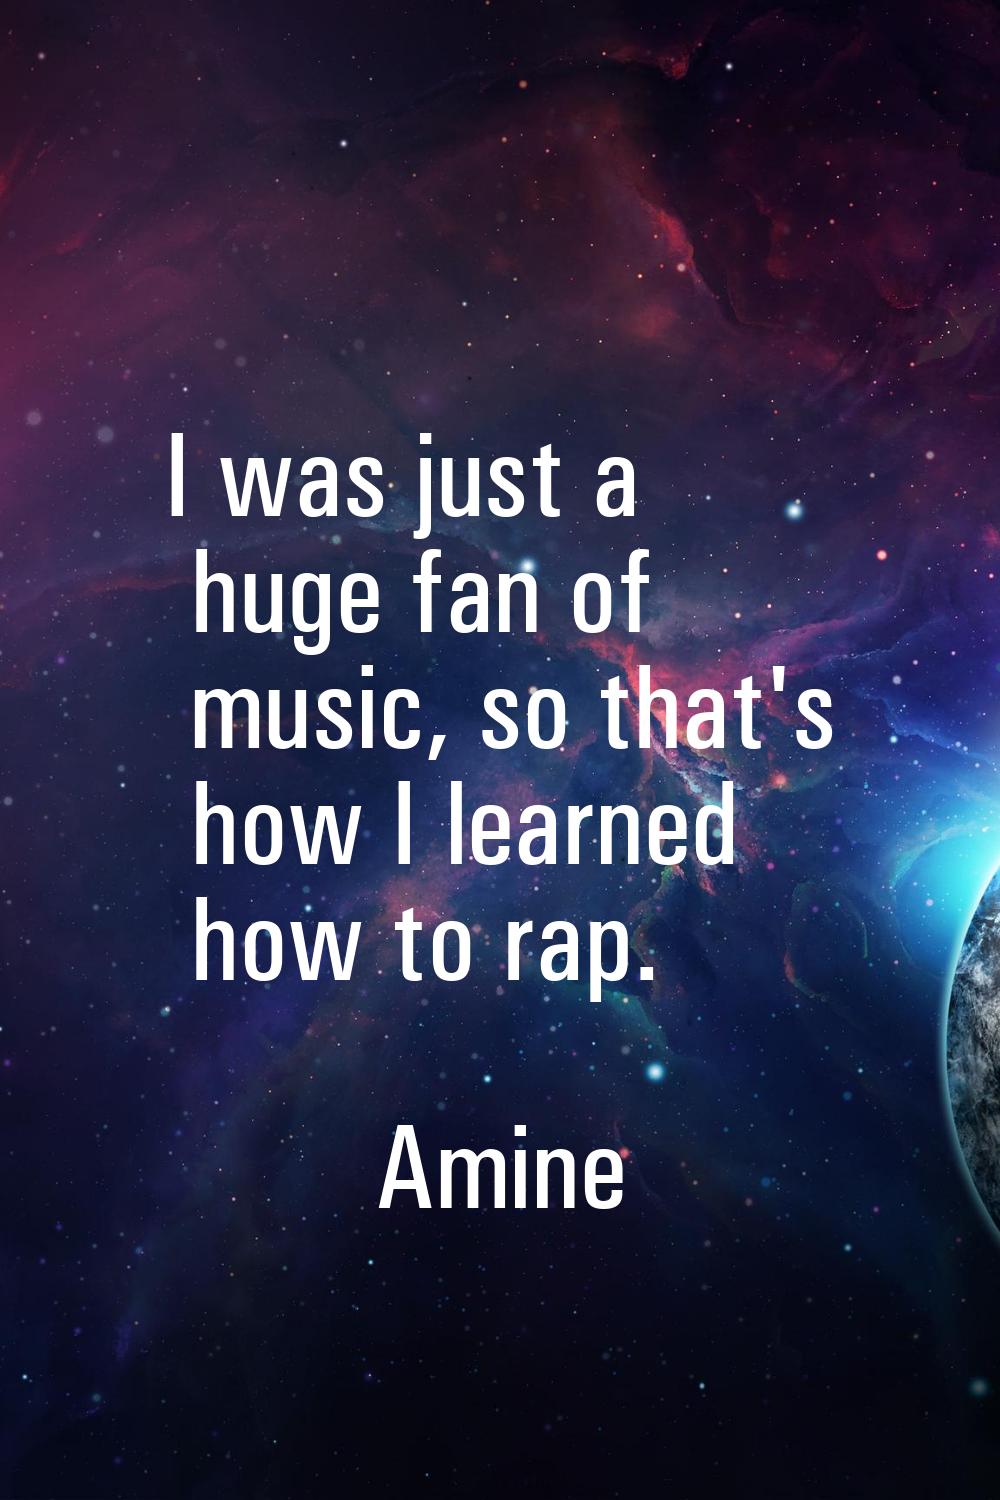 I was just a huge fan of music, so that's how I learned how to rap.